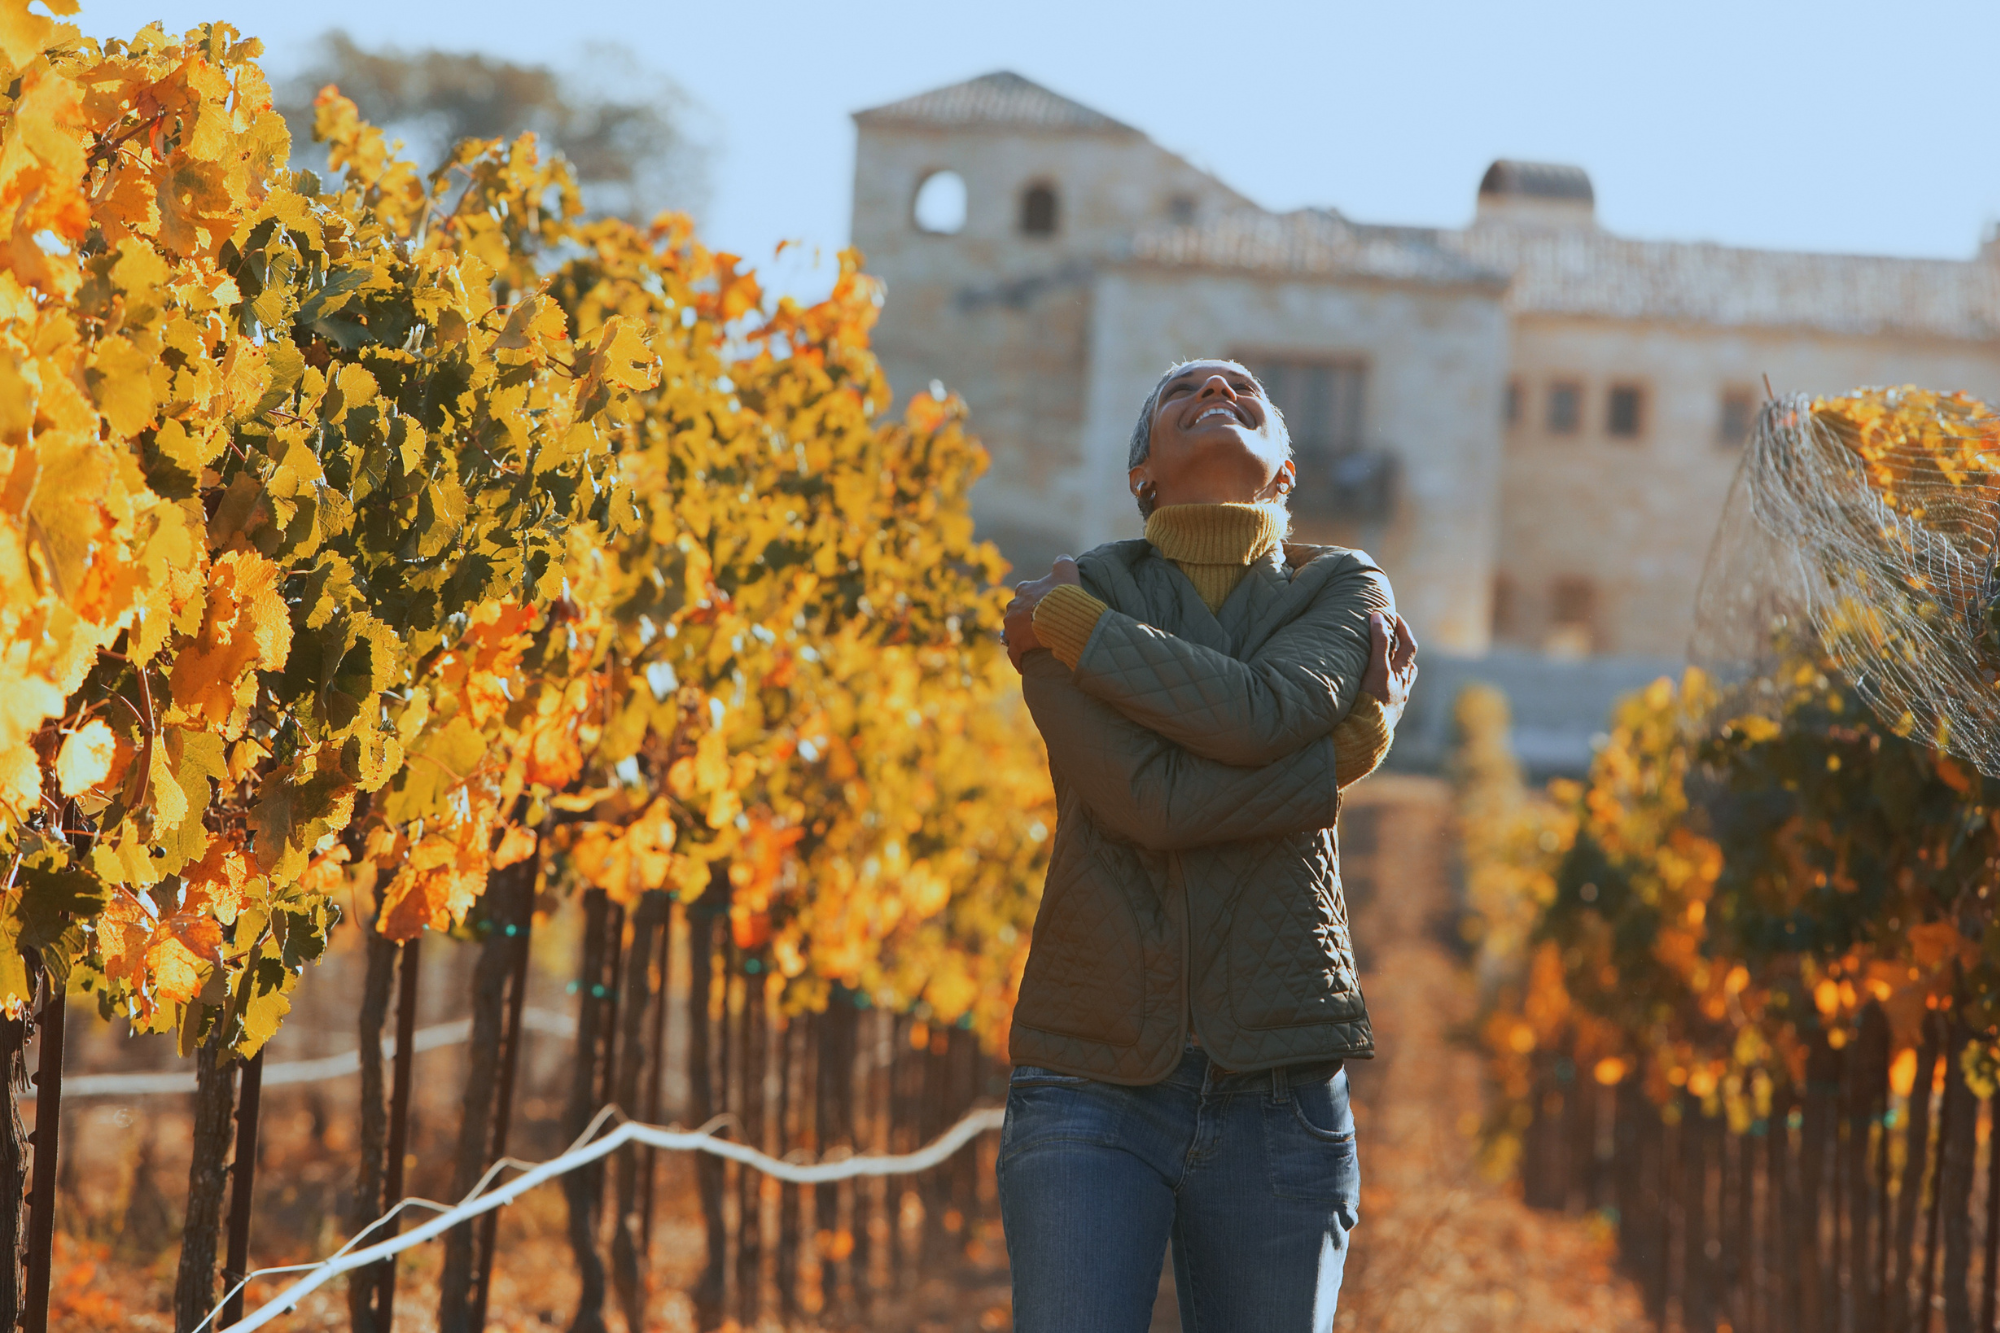 Woman hugging herself in vineyard during the fall